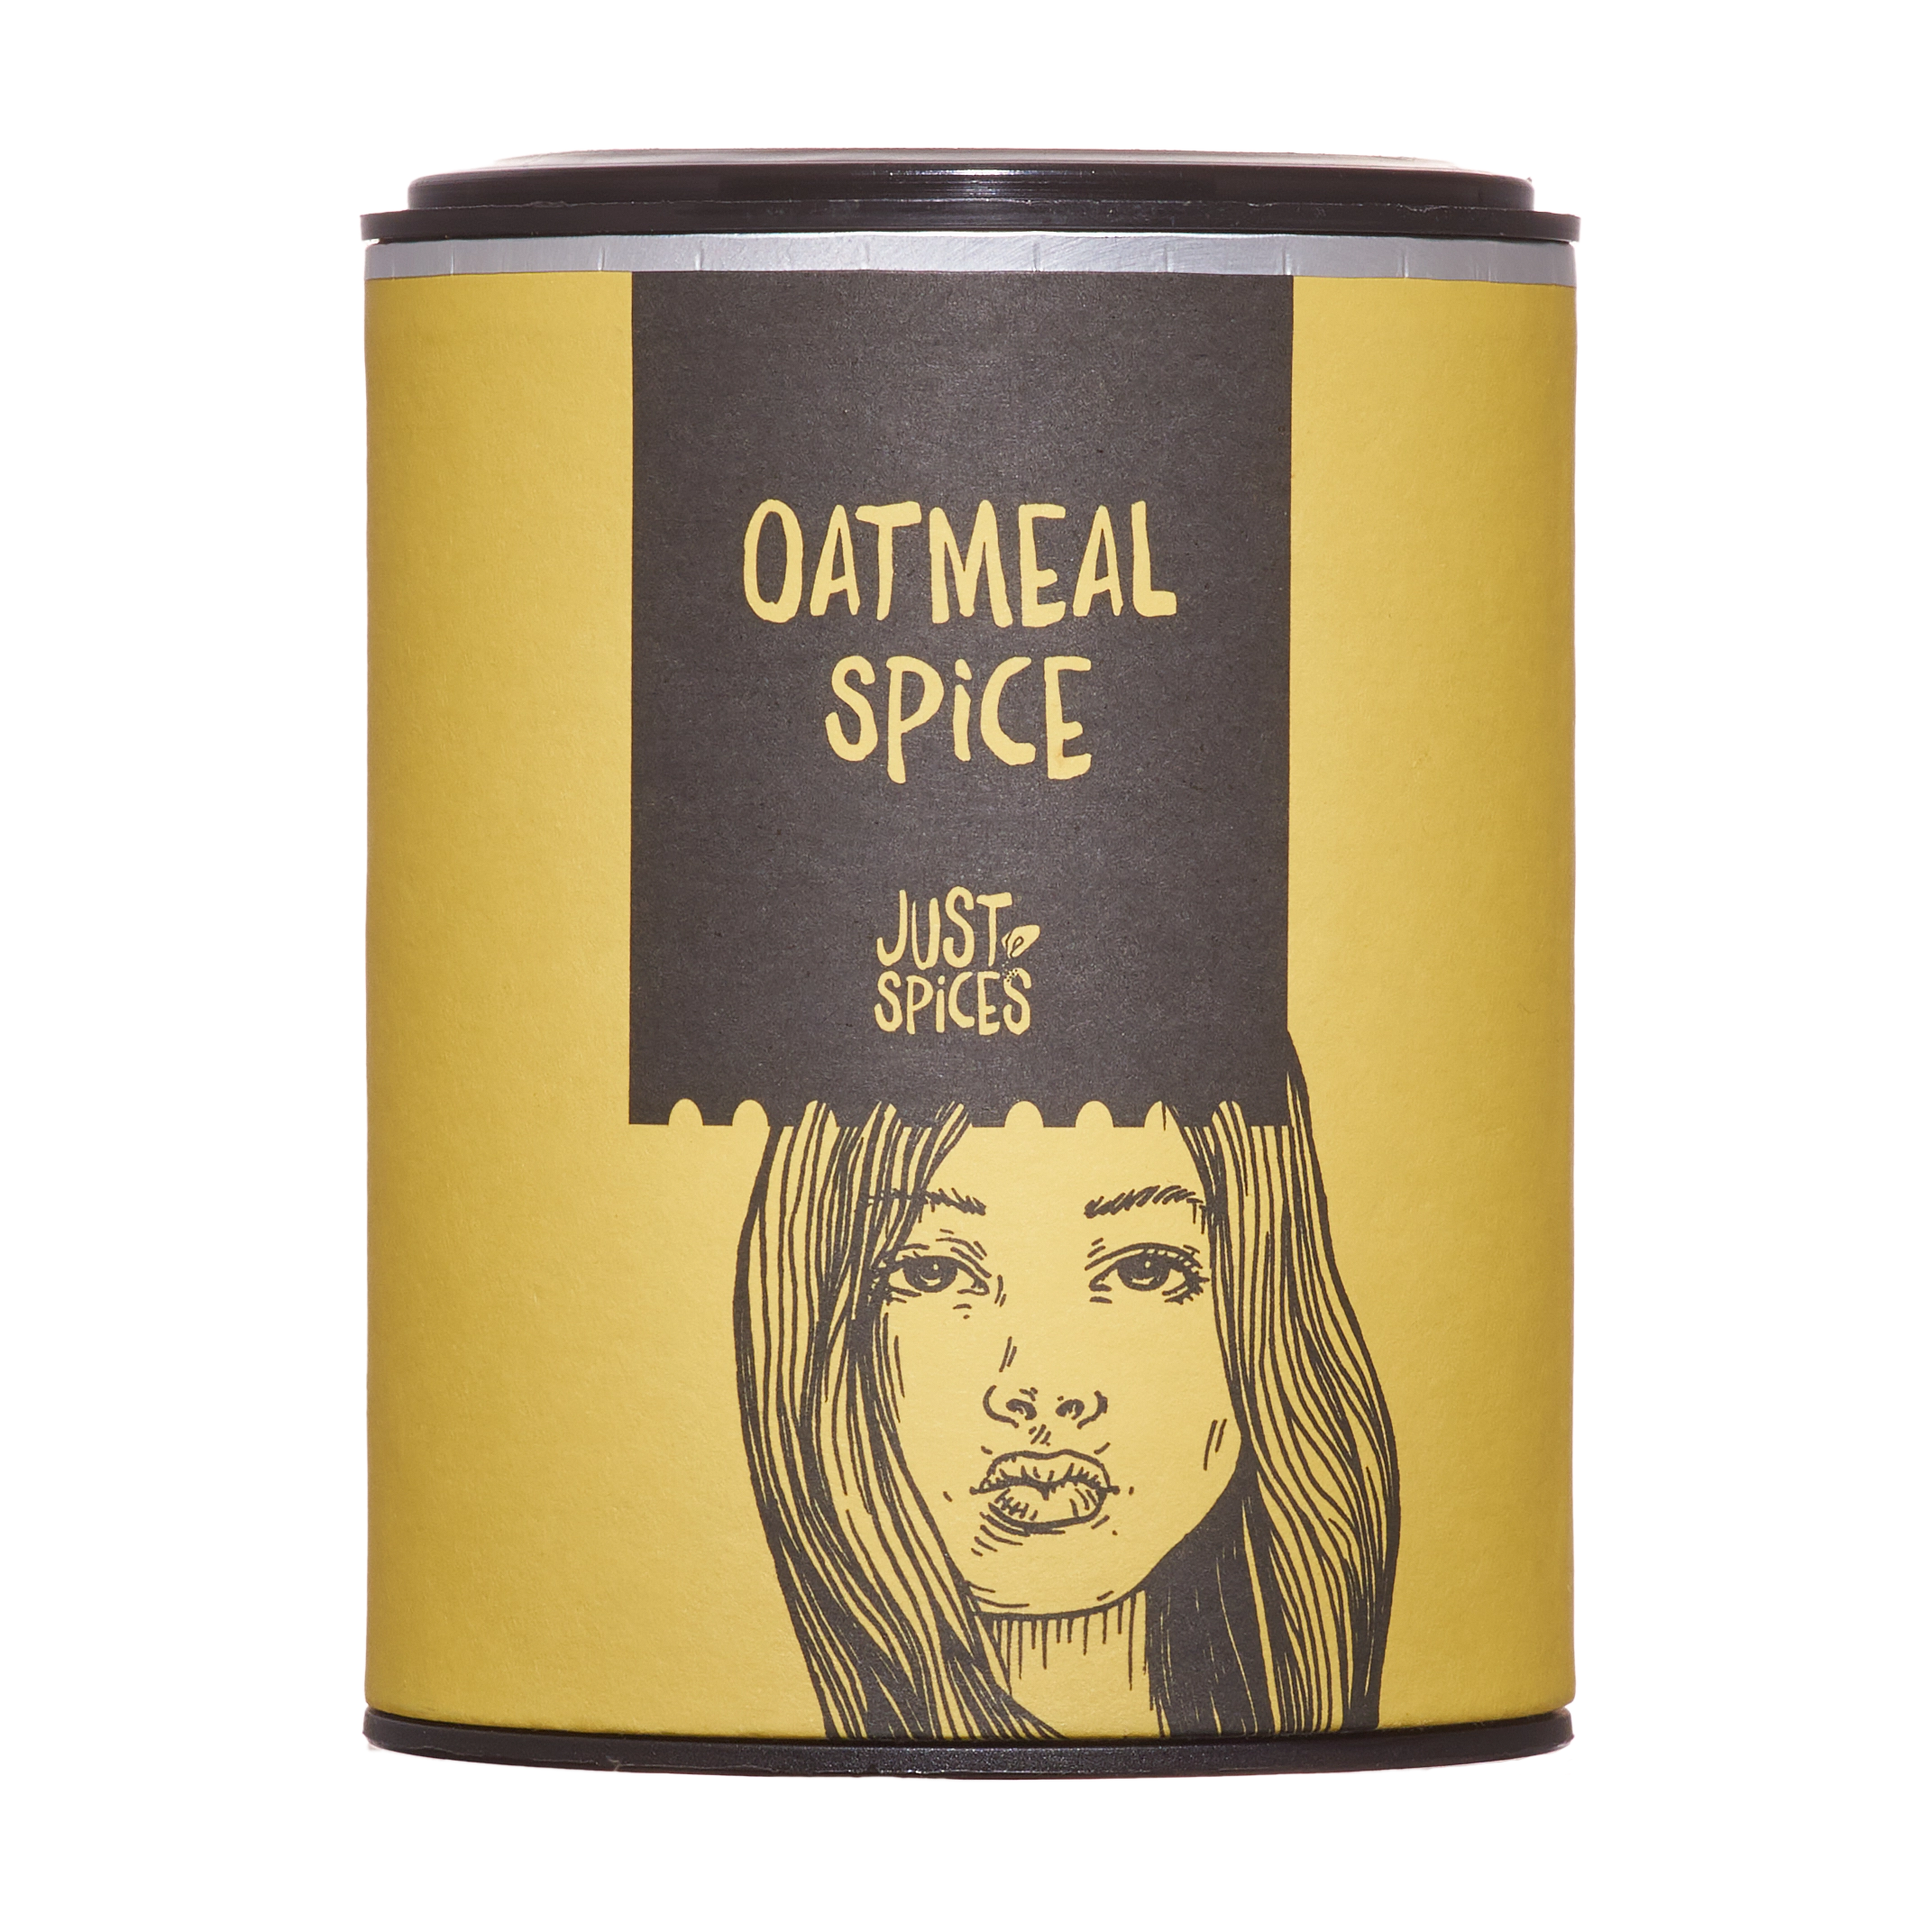 Just Spices Oatmeal Spice